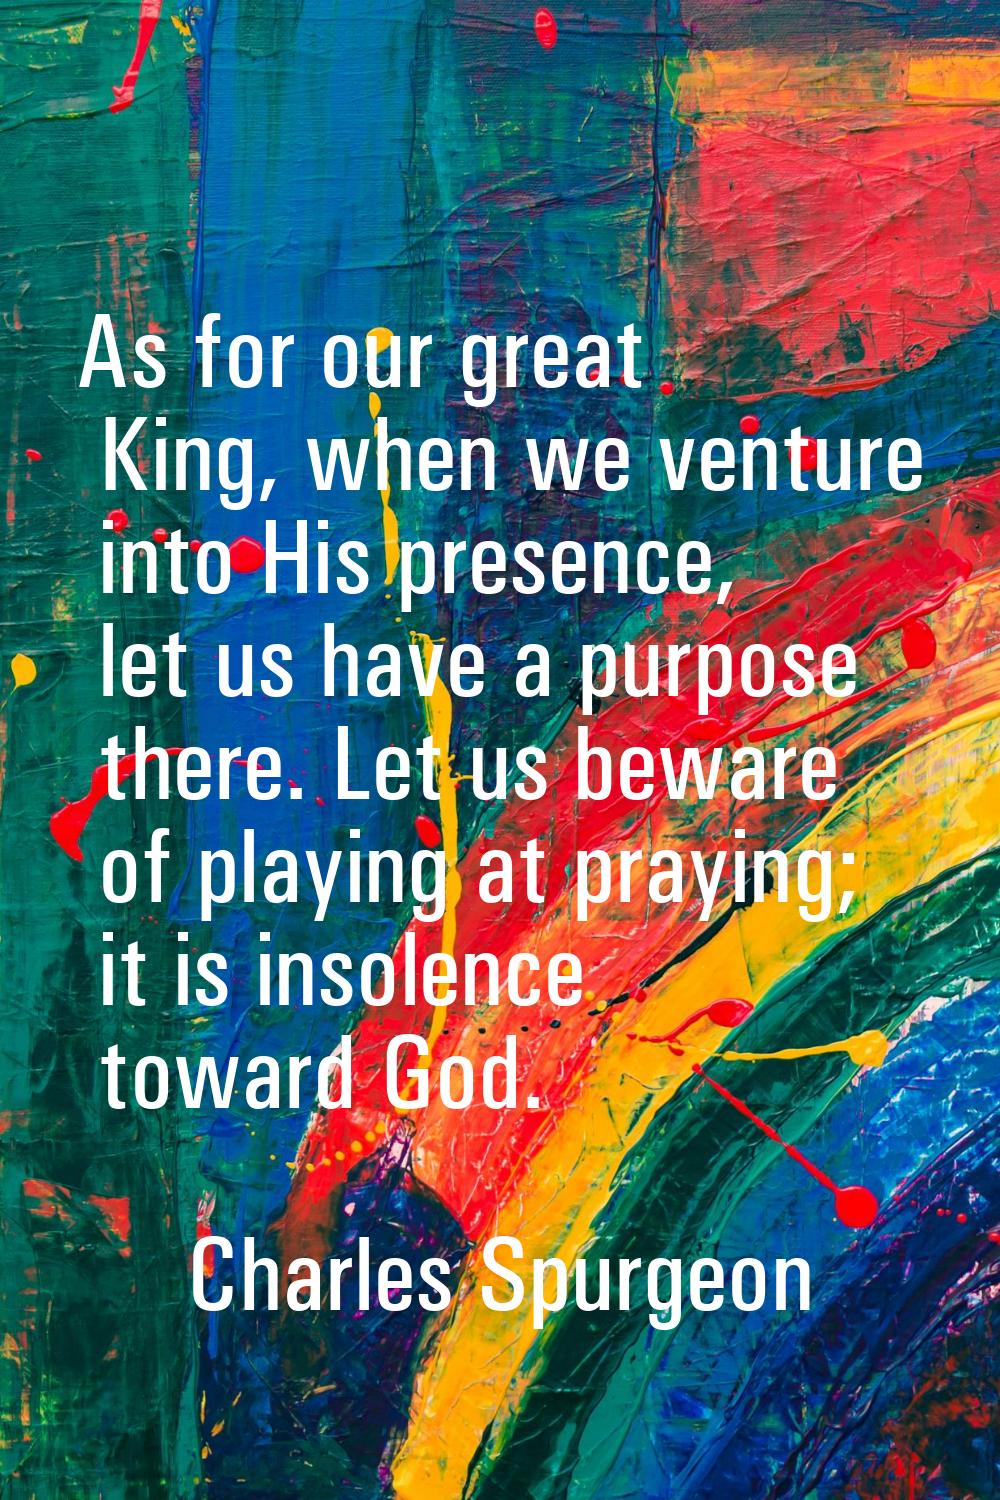 As for our great King, when we venture into His presence, let us have a purpose there. Let us bewar